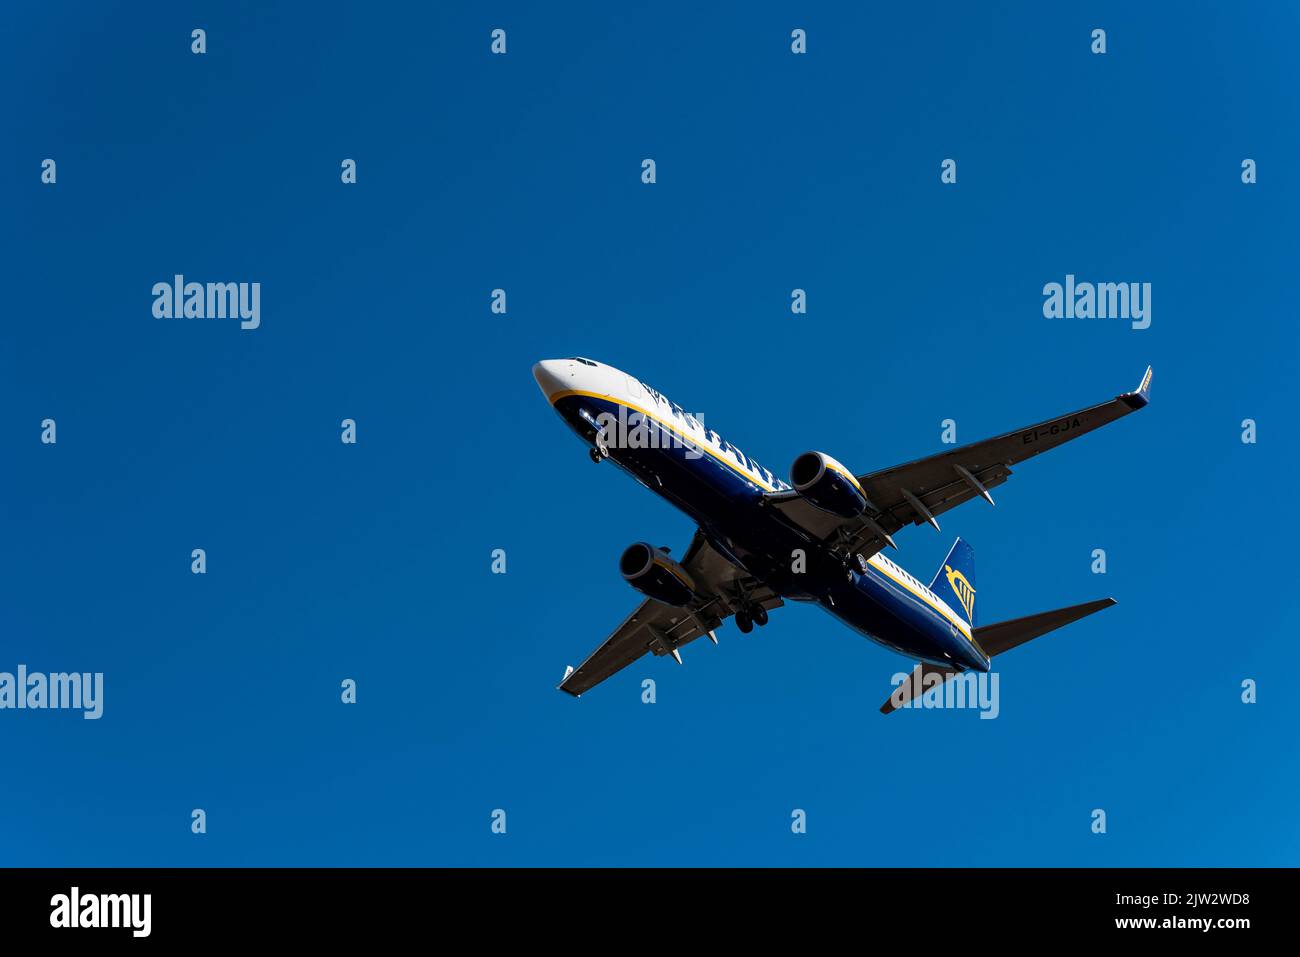 Ryanair Boeing 737 plane approaching in the landing maneuver at the airport in Alicante/Elche (El Altet) Costa Blanca, Spain, Europe Stock Photo